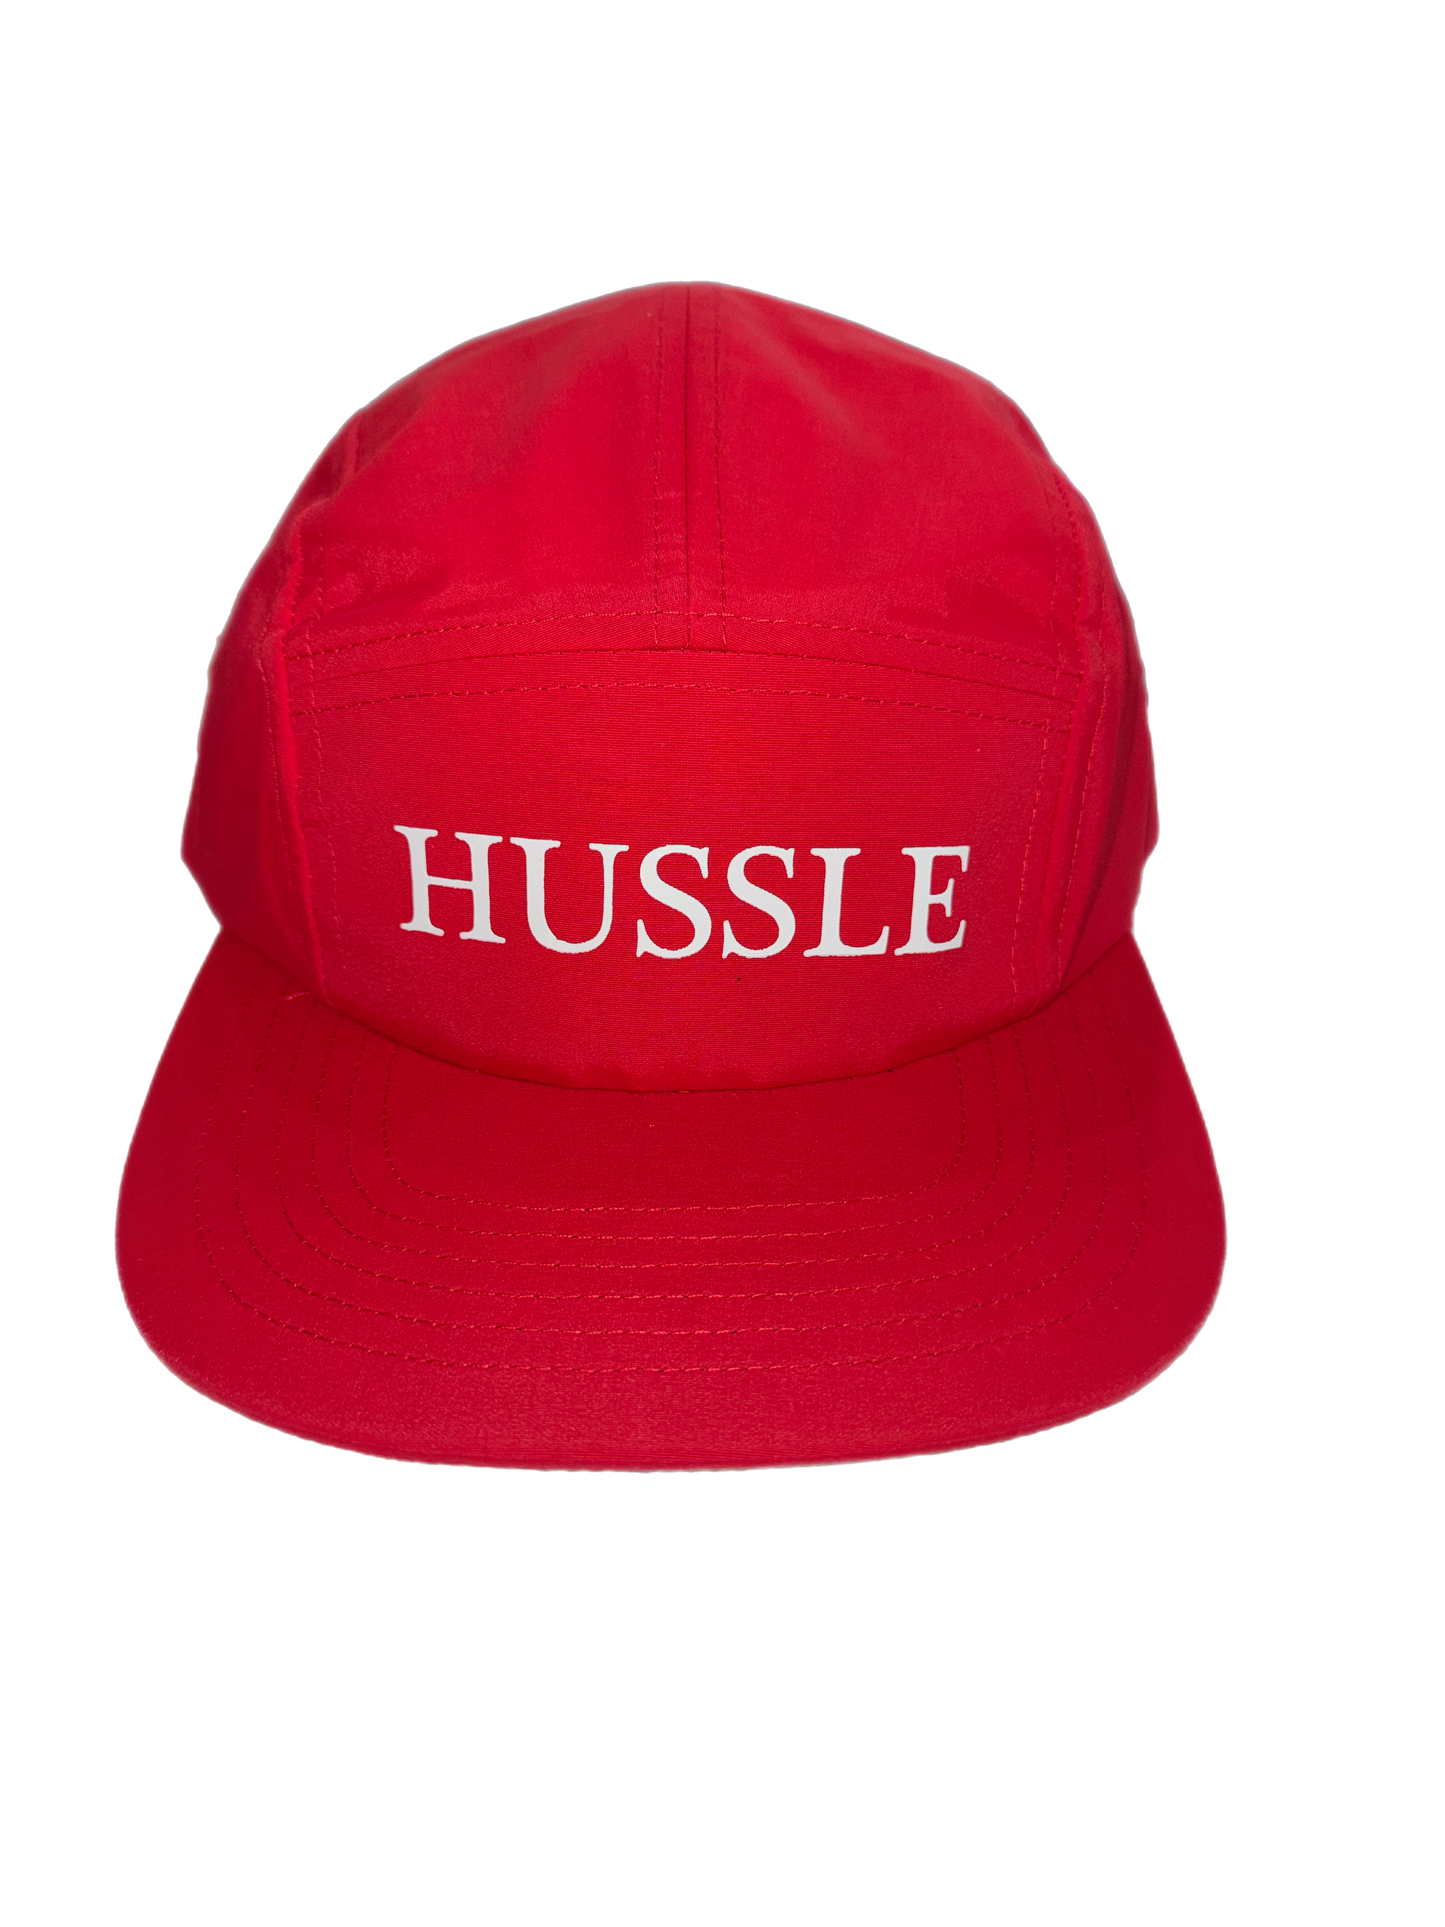 HUSSLE RED